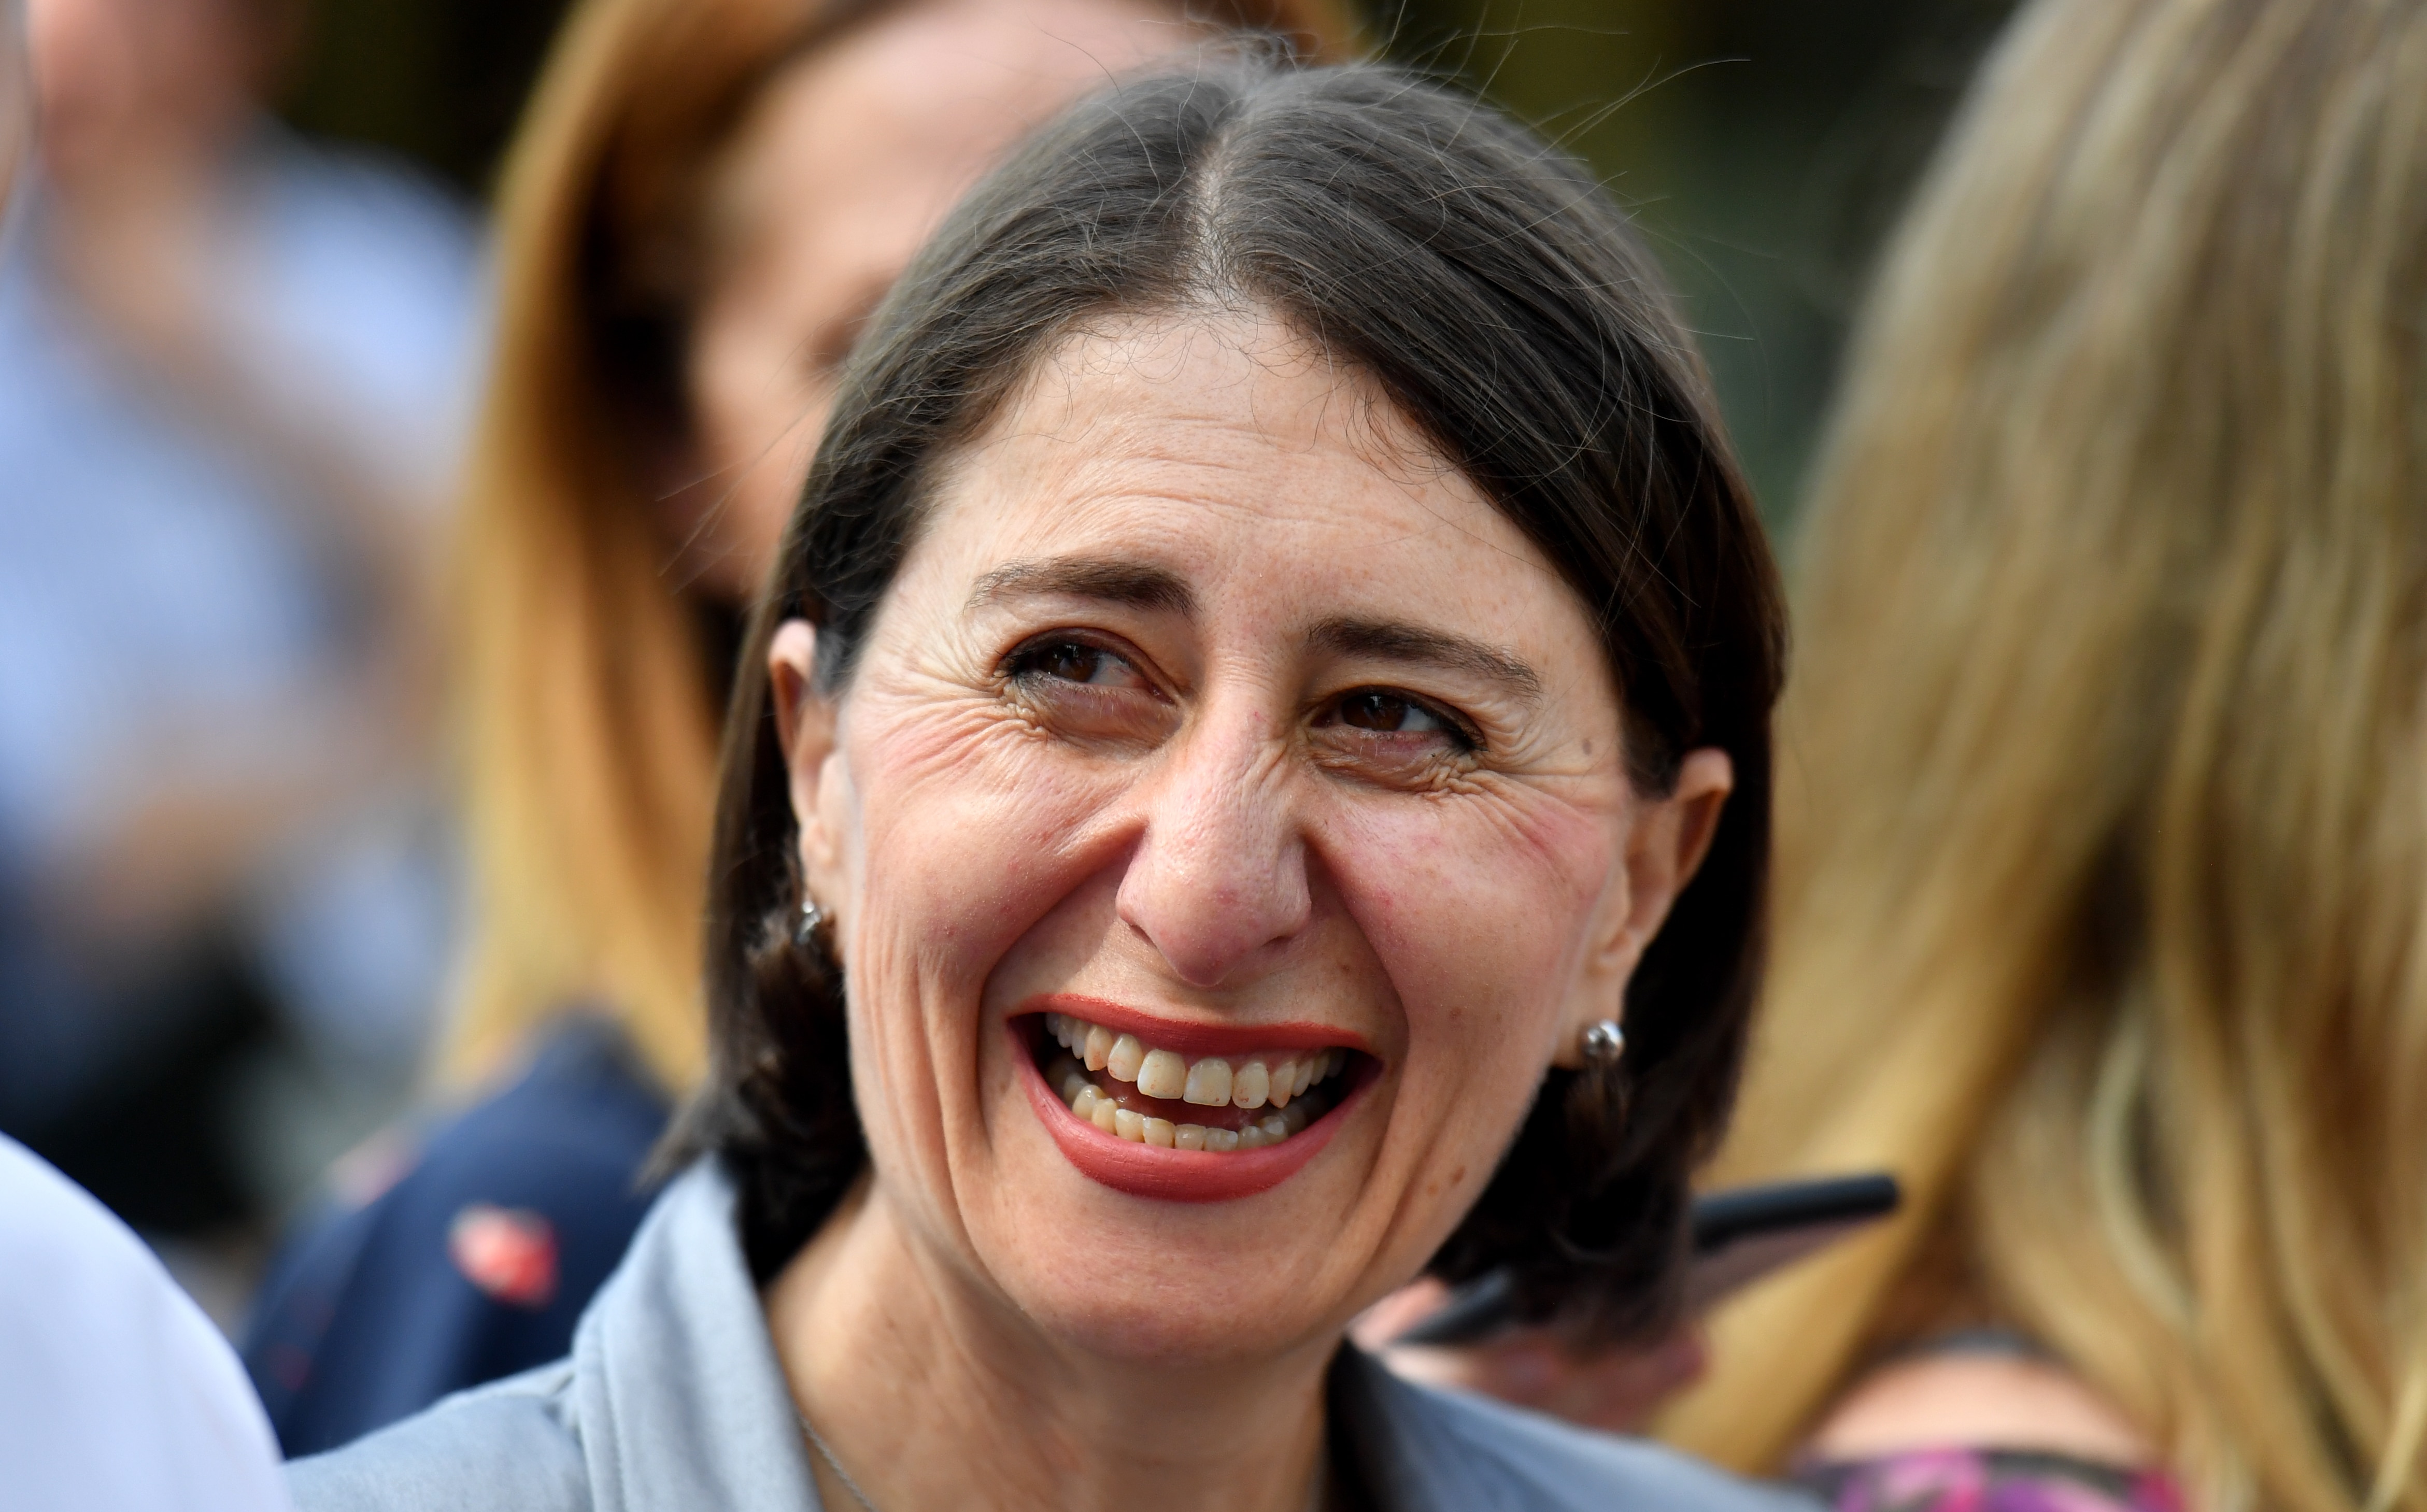 NSW Premier Gladys Berejiklian at a press conference at Lismore Pre-school in Lismore, Wednesday.